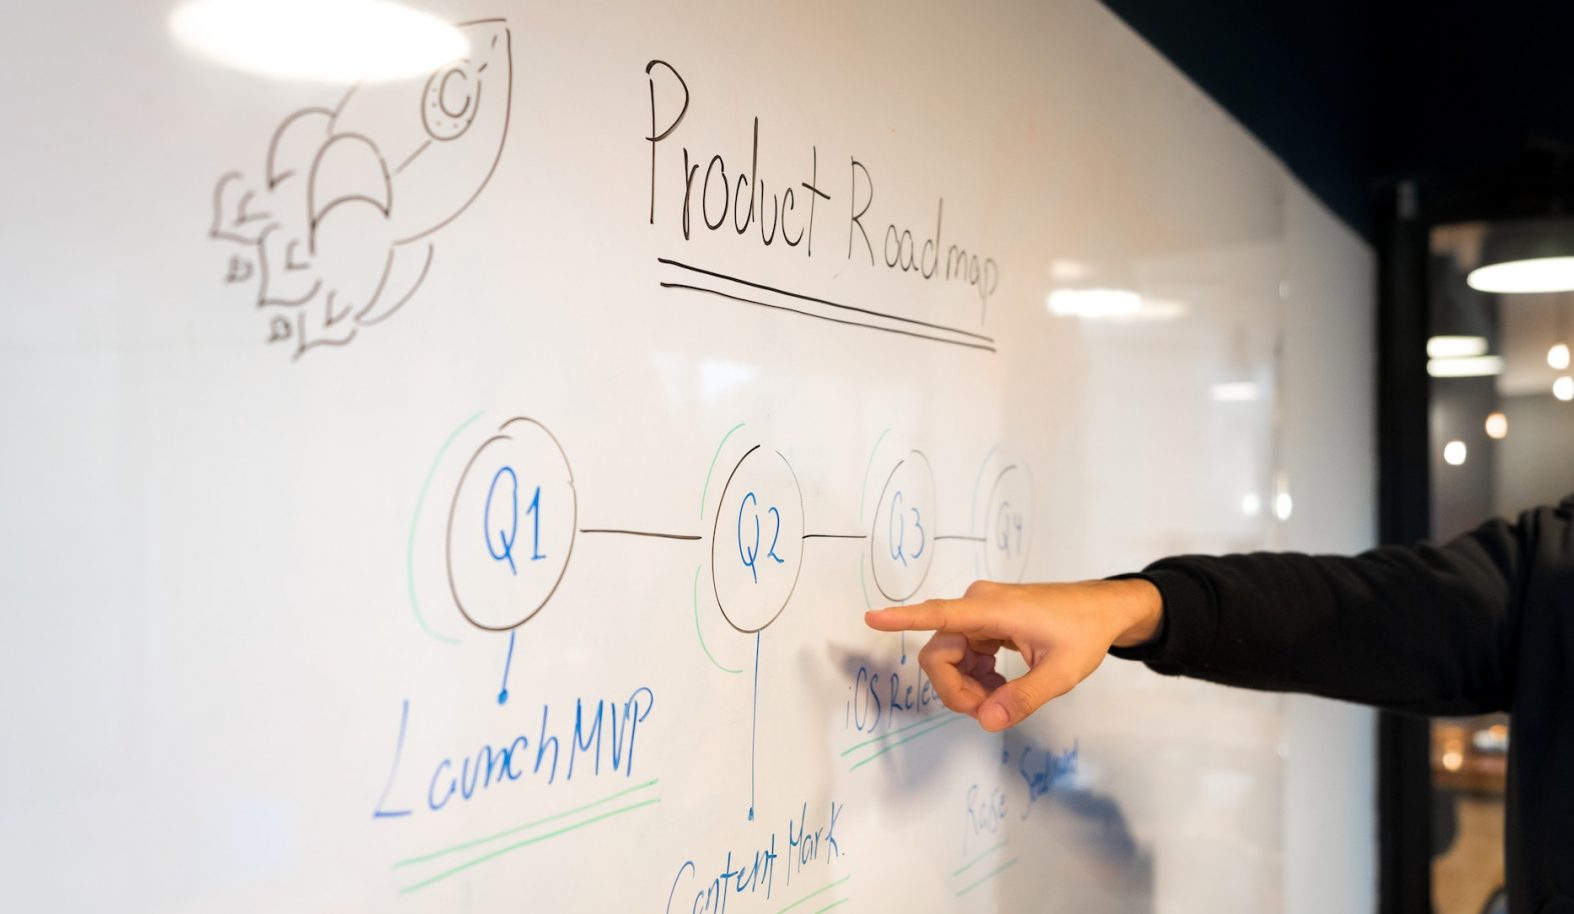 Person detailing a product roadmap on the whiteboard